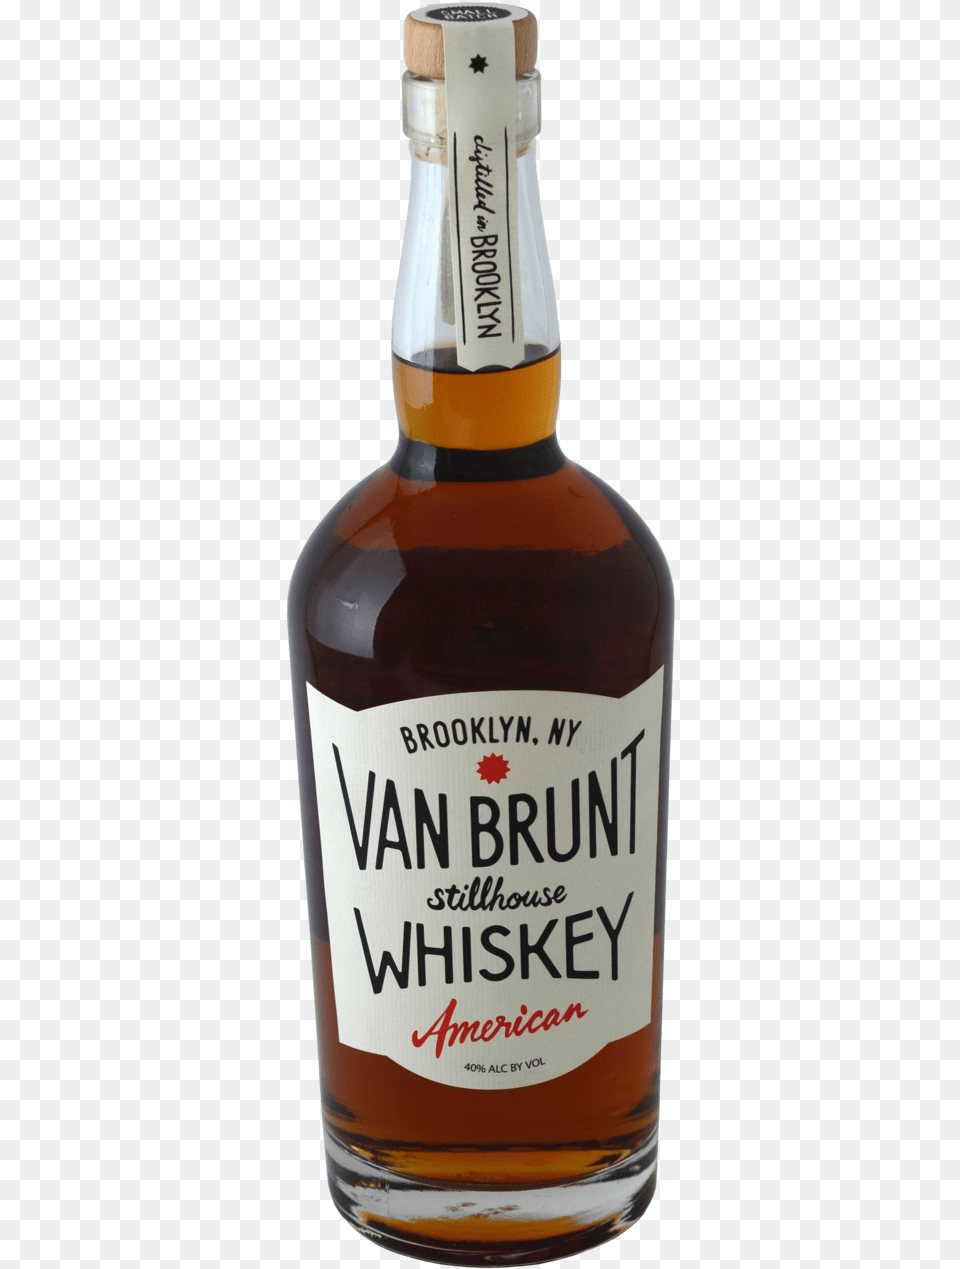 Wheat And Barley Are The Building Blocks For This Unique Stillhouse Corn Whiskey, Alcohol, Beverage, Liquor, Beer Png Image